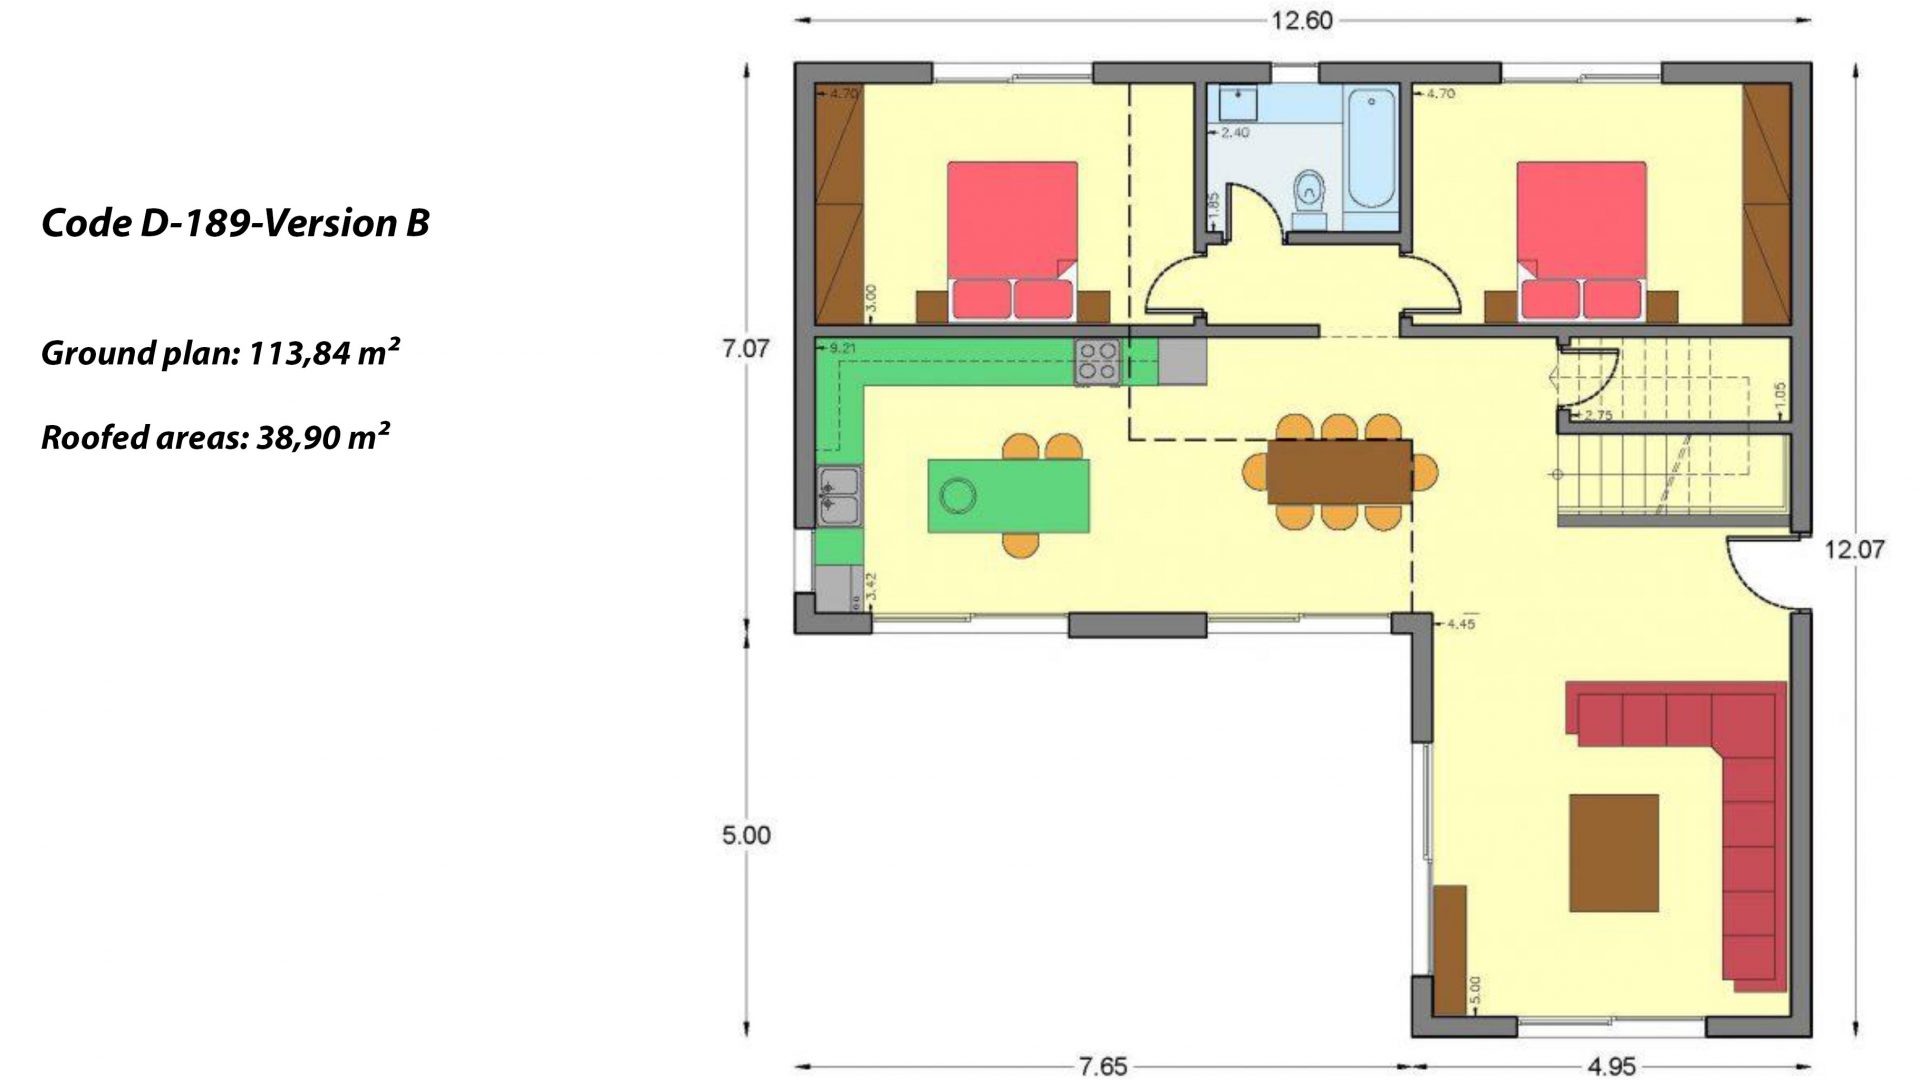 2-story house D-189, with a total area of ​​189.61 sq.m. ,covered roofed areas 38.90 m²,balconies 38.07 m²